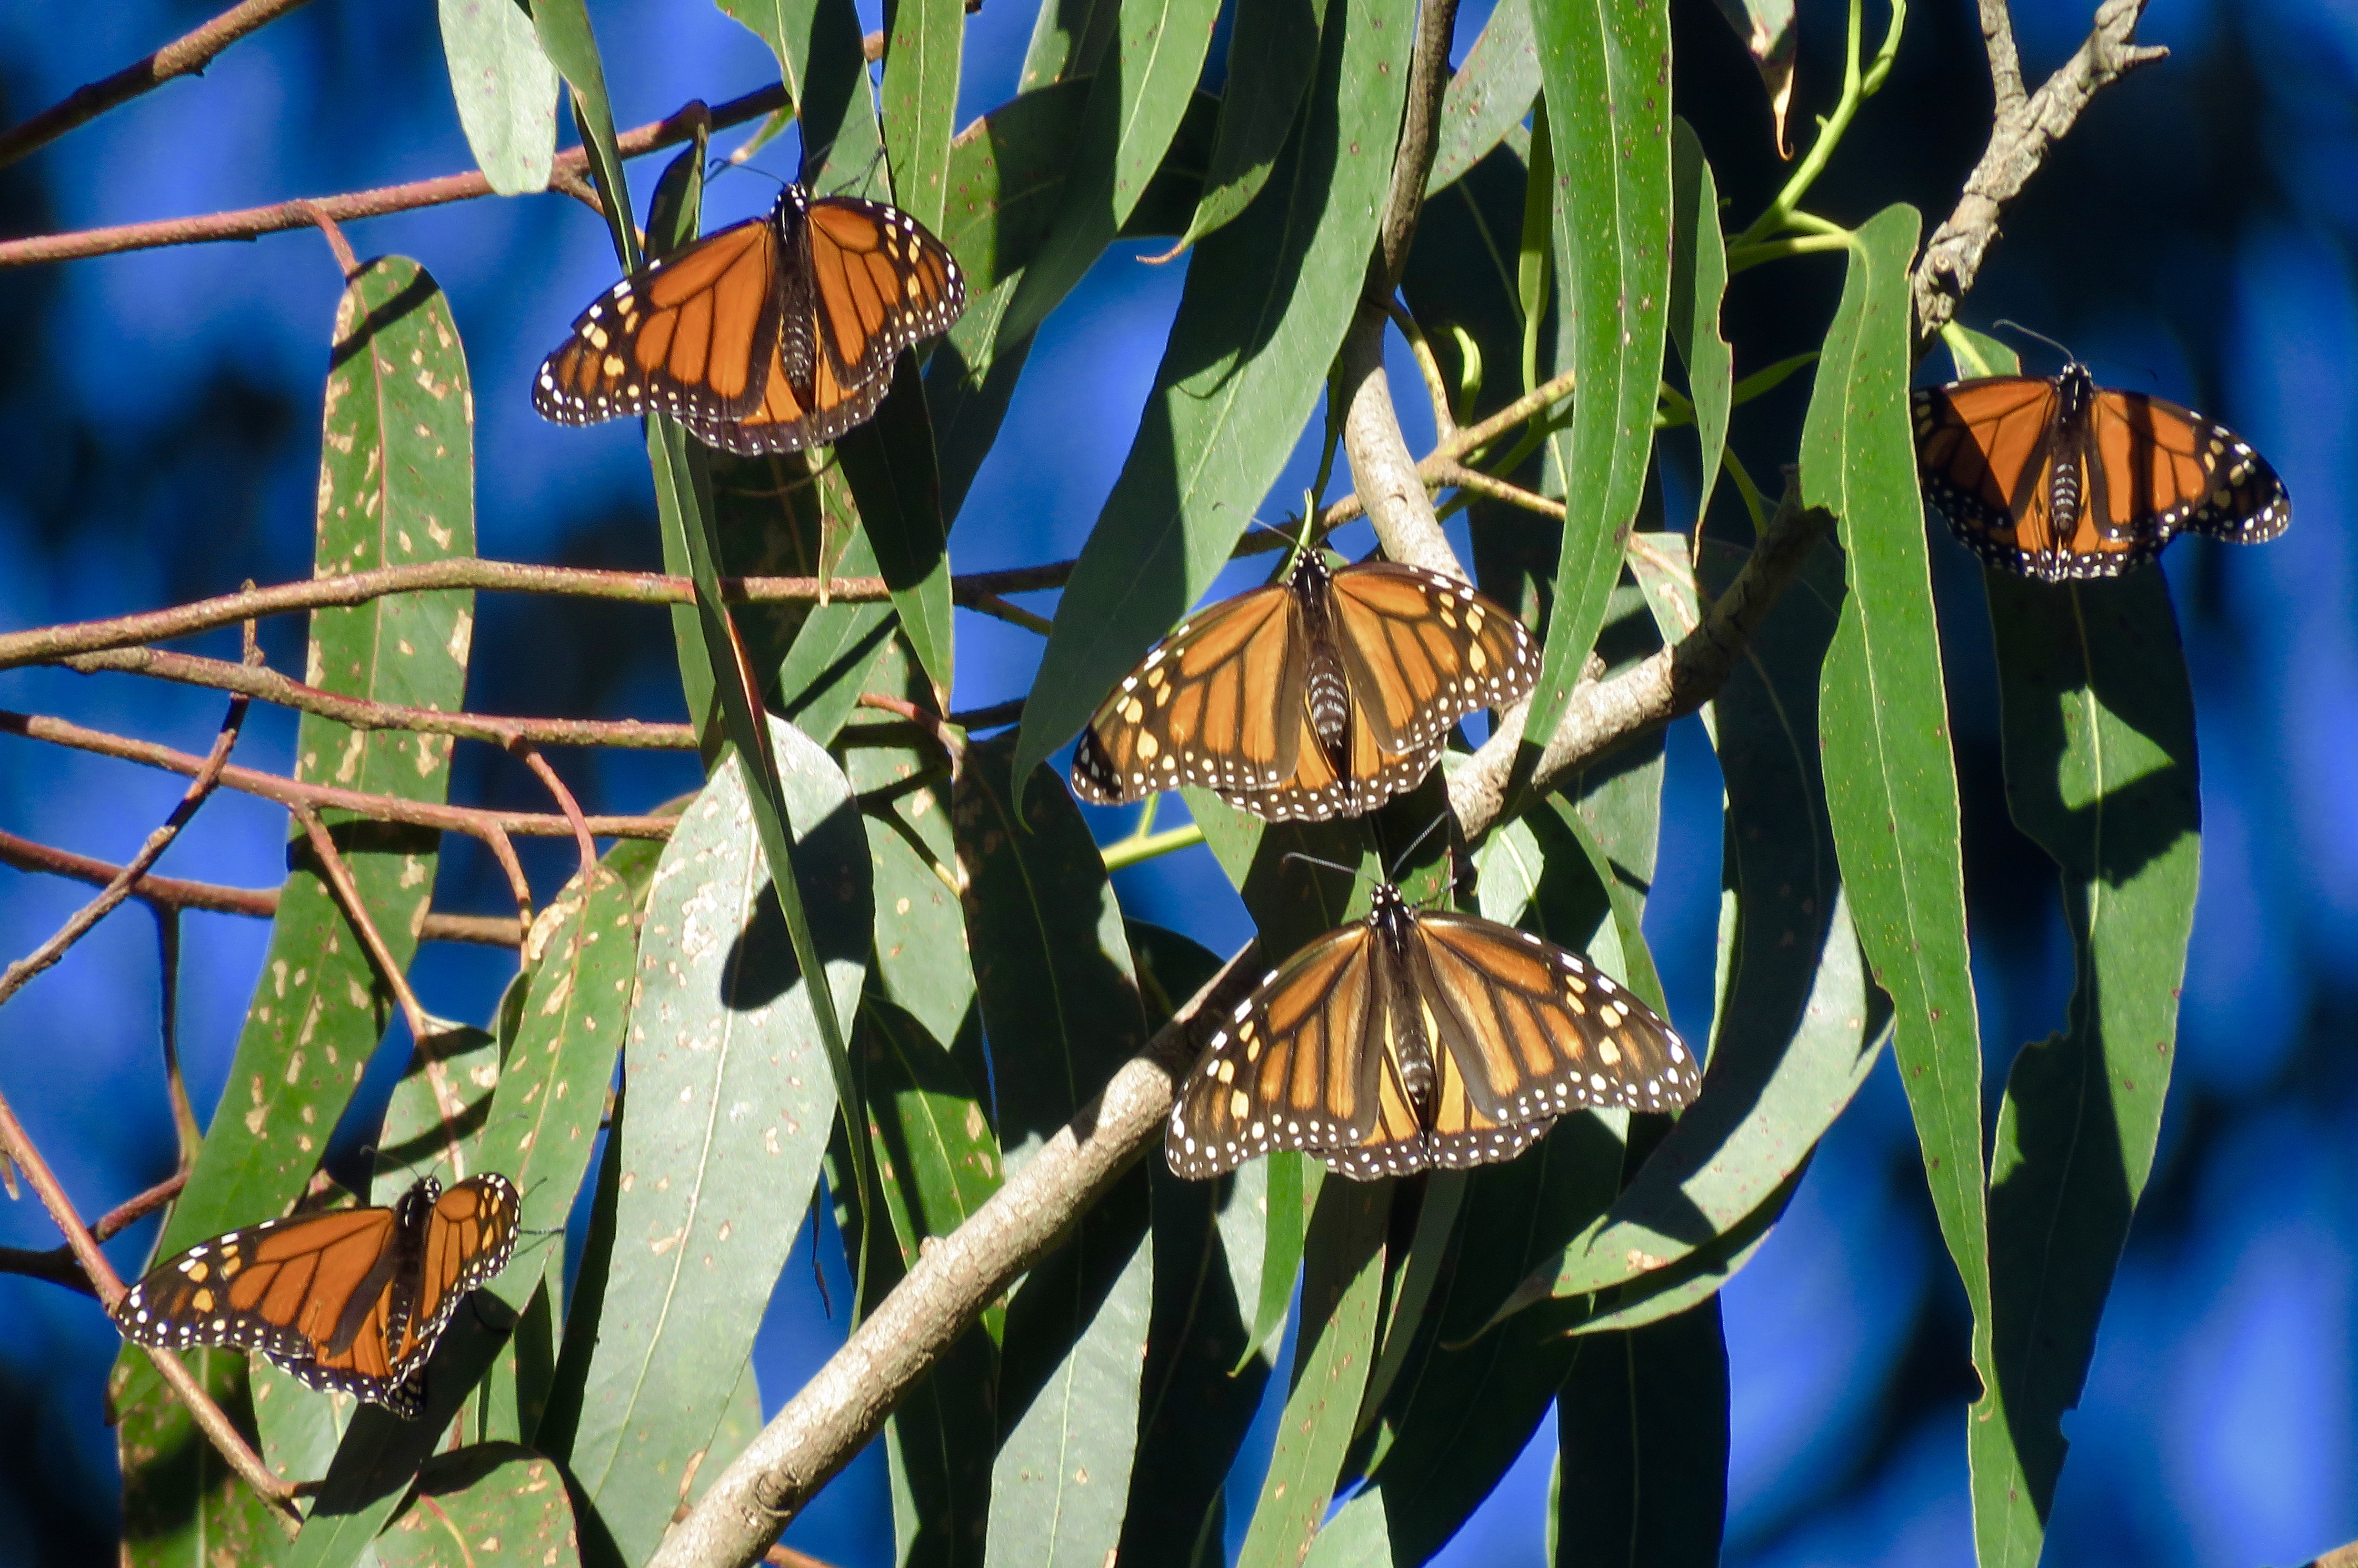 Monarch butterflies overwintering in the Presidio by warming themselves on a Eucalyptus tree.